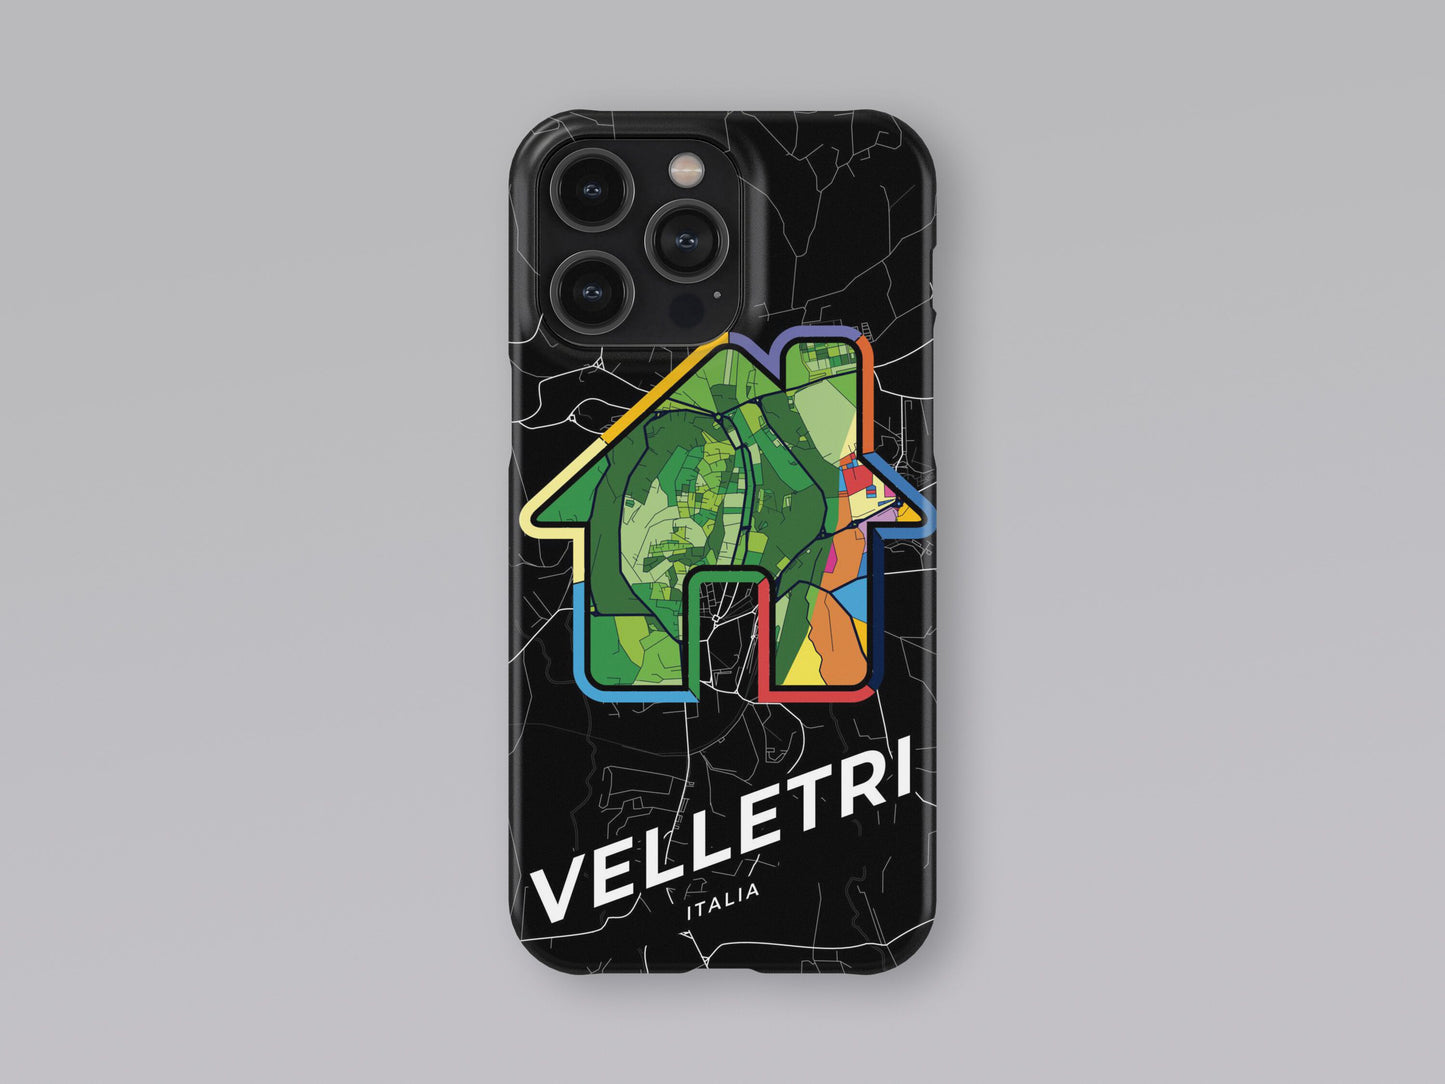 Velletri Italy slim phone case with colorful icon 3